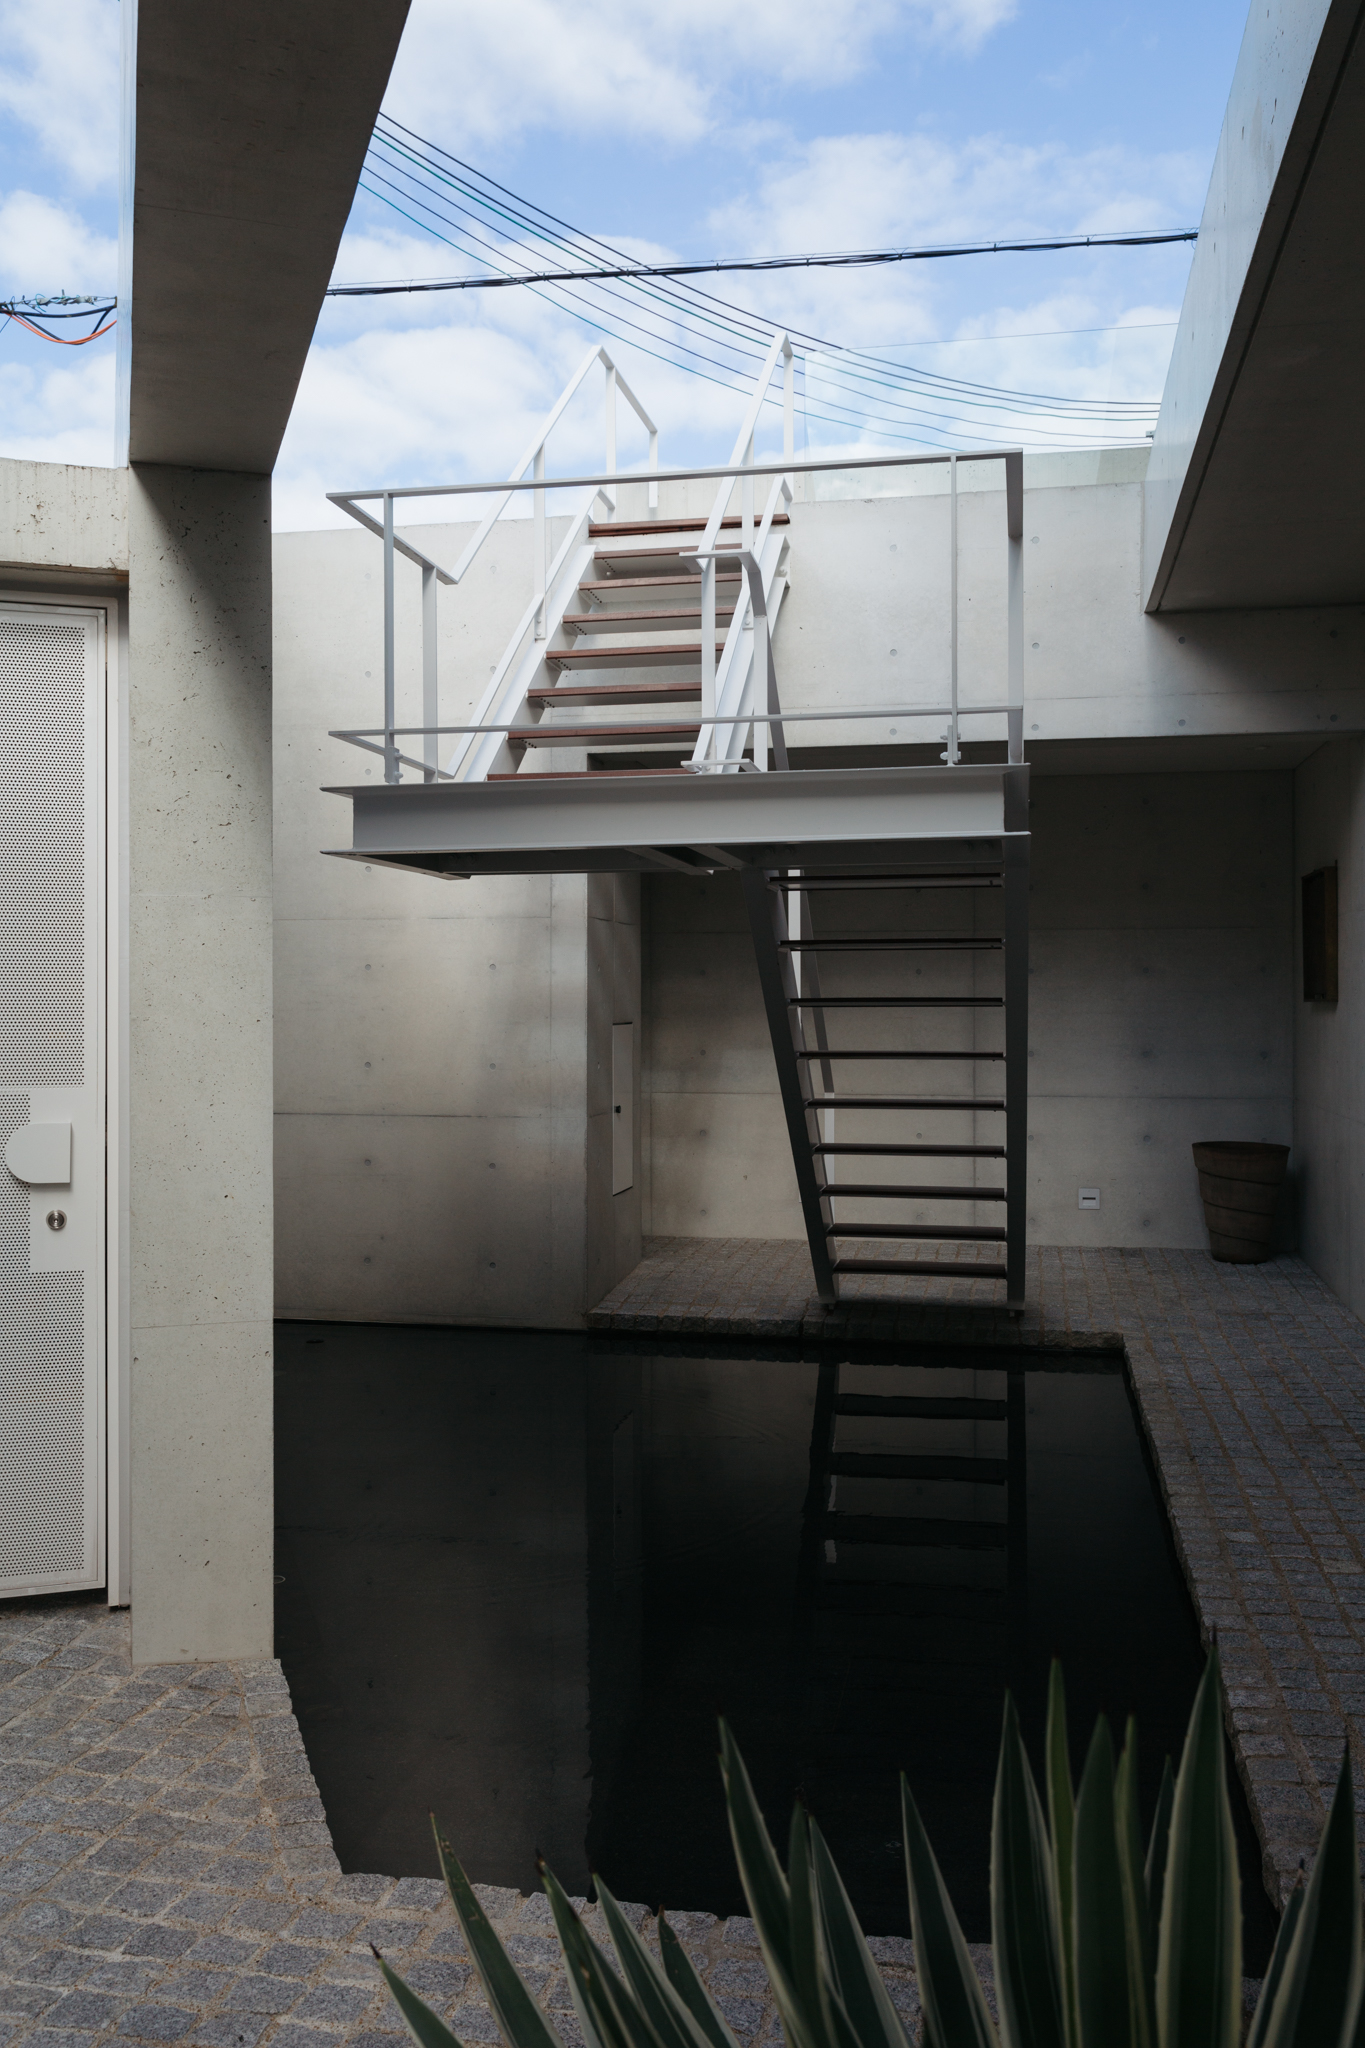 House in Yamanoi: Stairs and Water